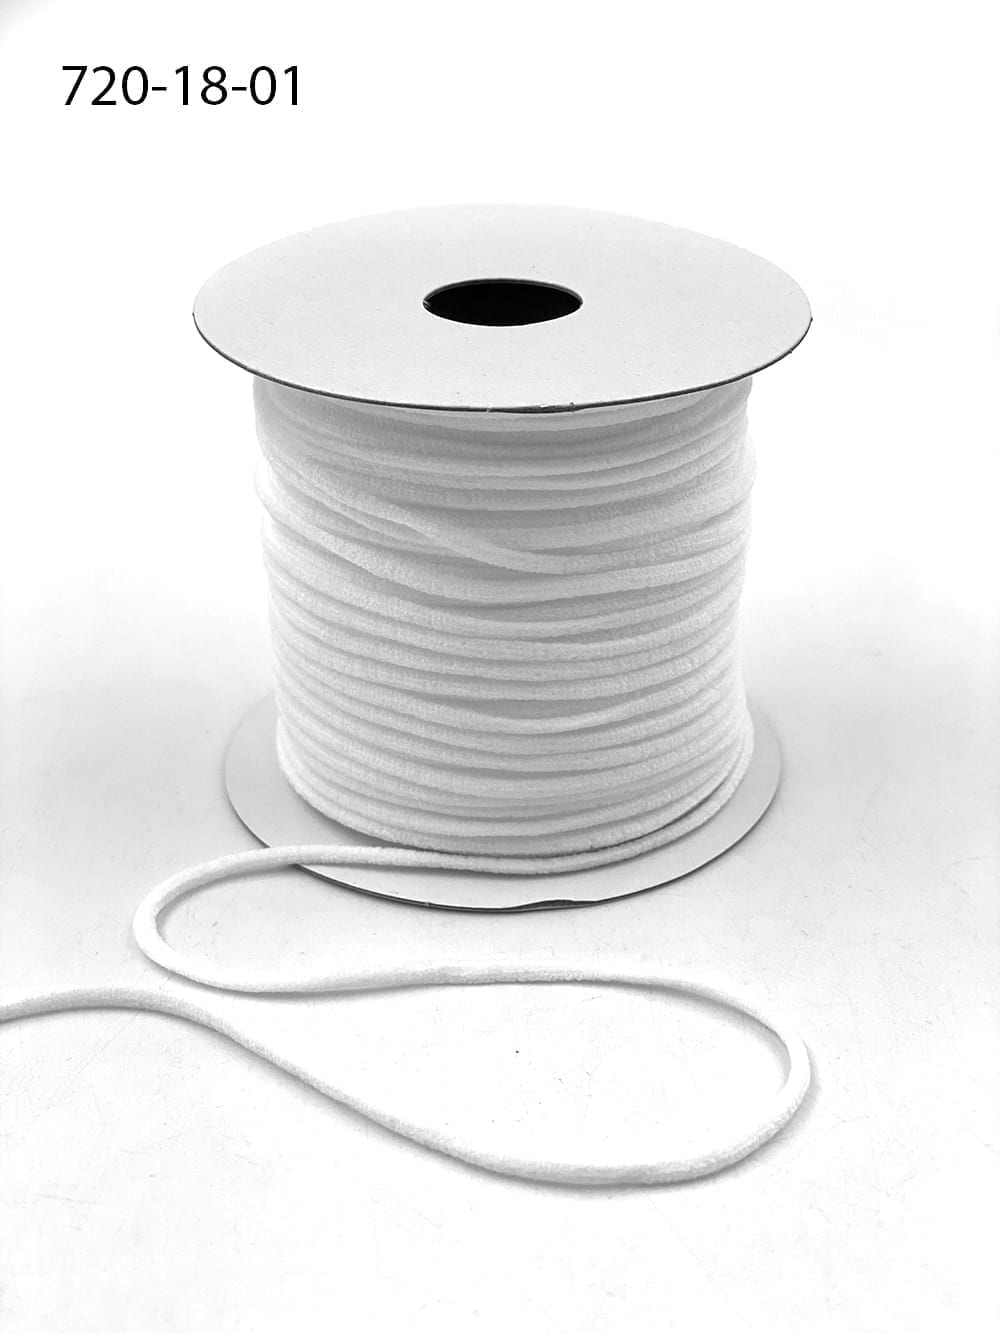 Fablastic Stretch Cord for Mask Making, Round 3mm (0.118 inch) Thick, 100 Yard Spool, Black